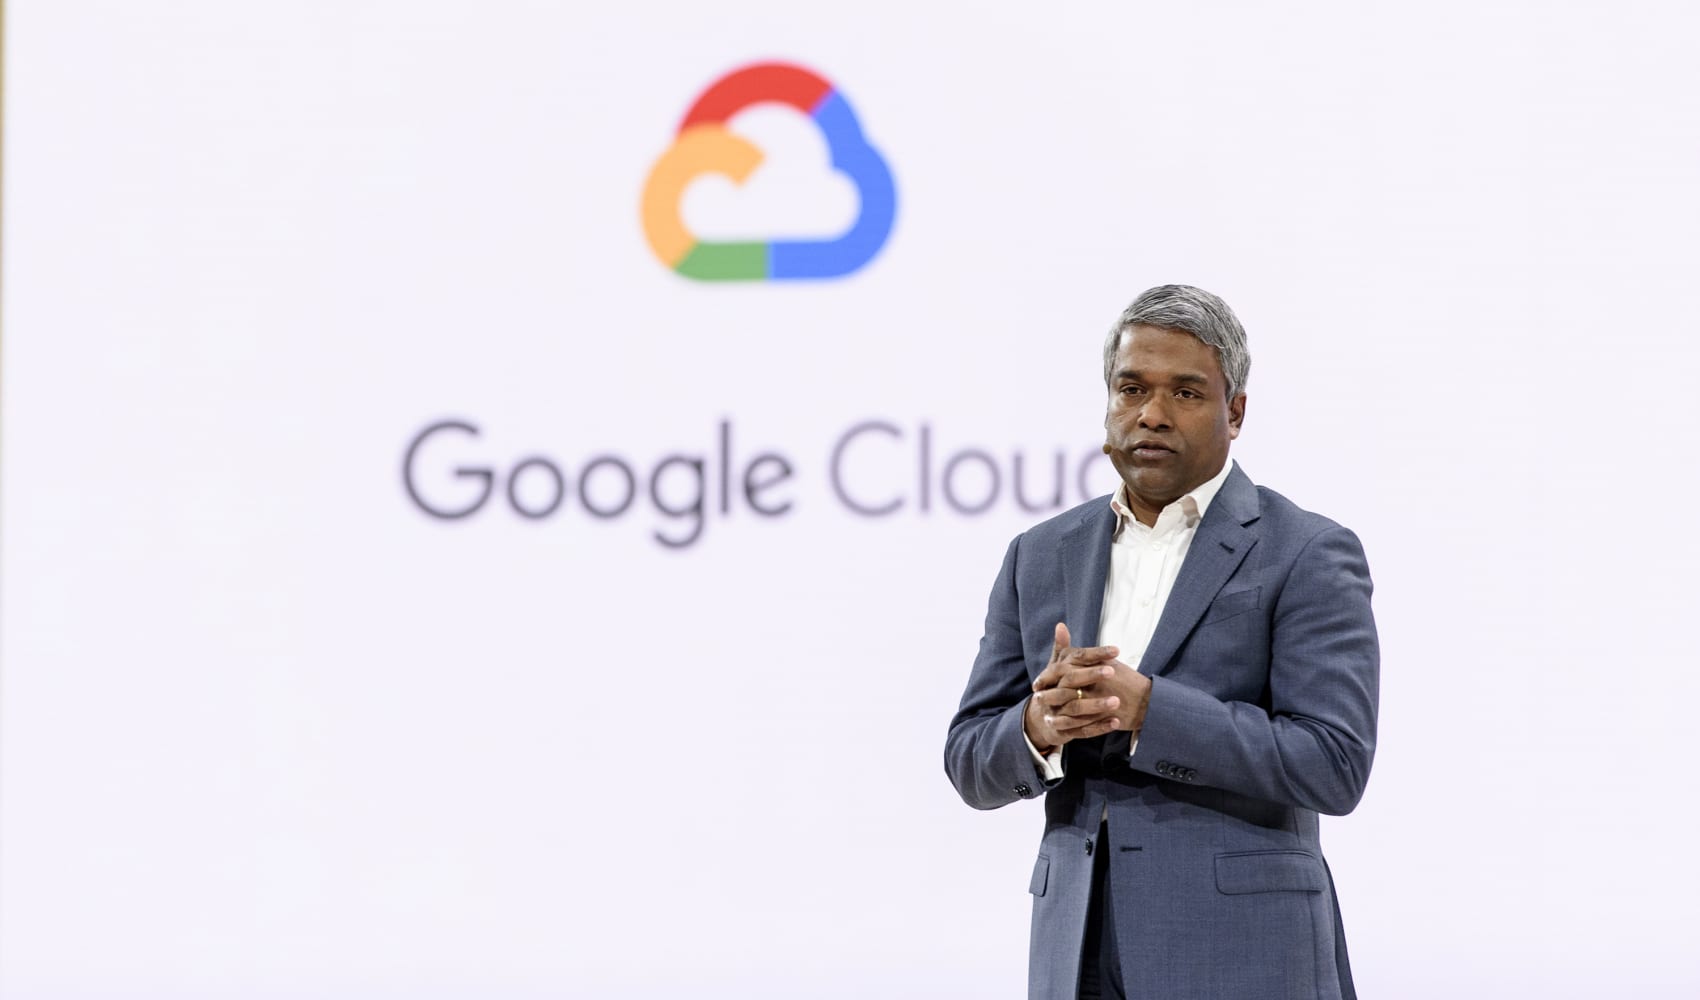 Google unveils new AI-powered tools at Las Vegas conference